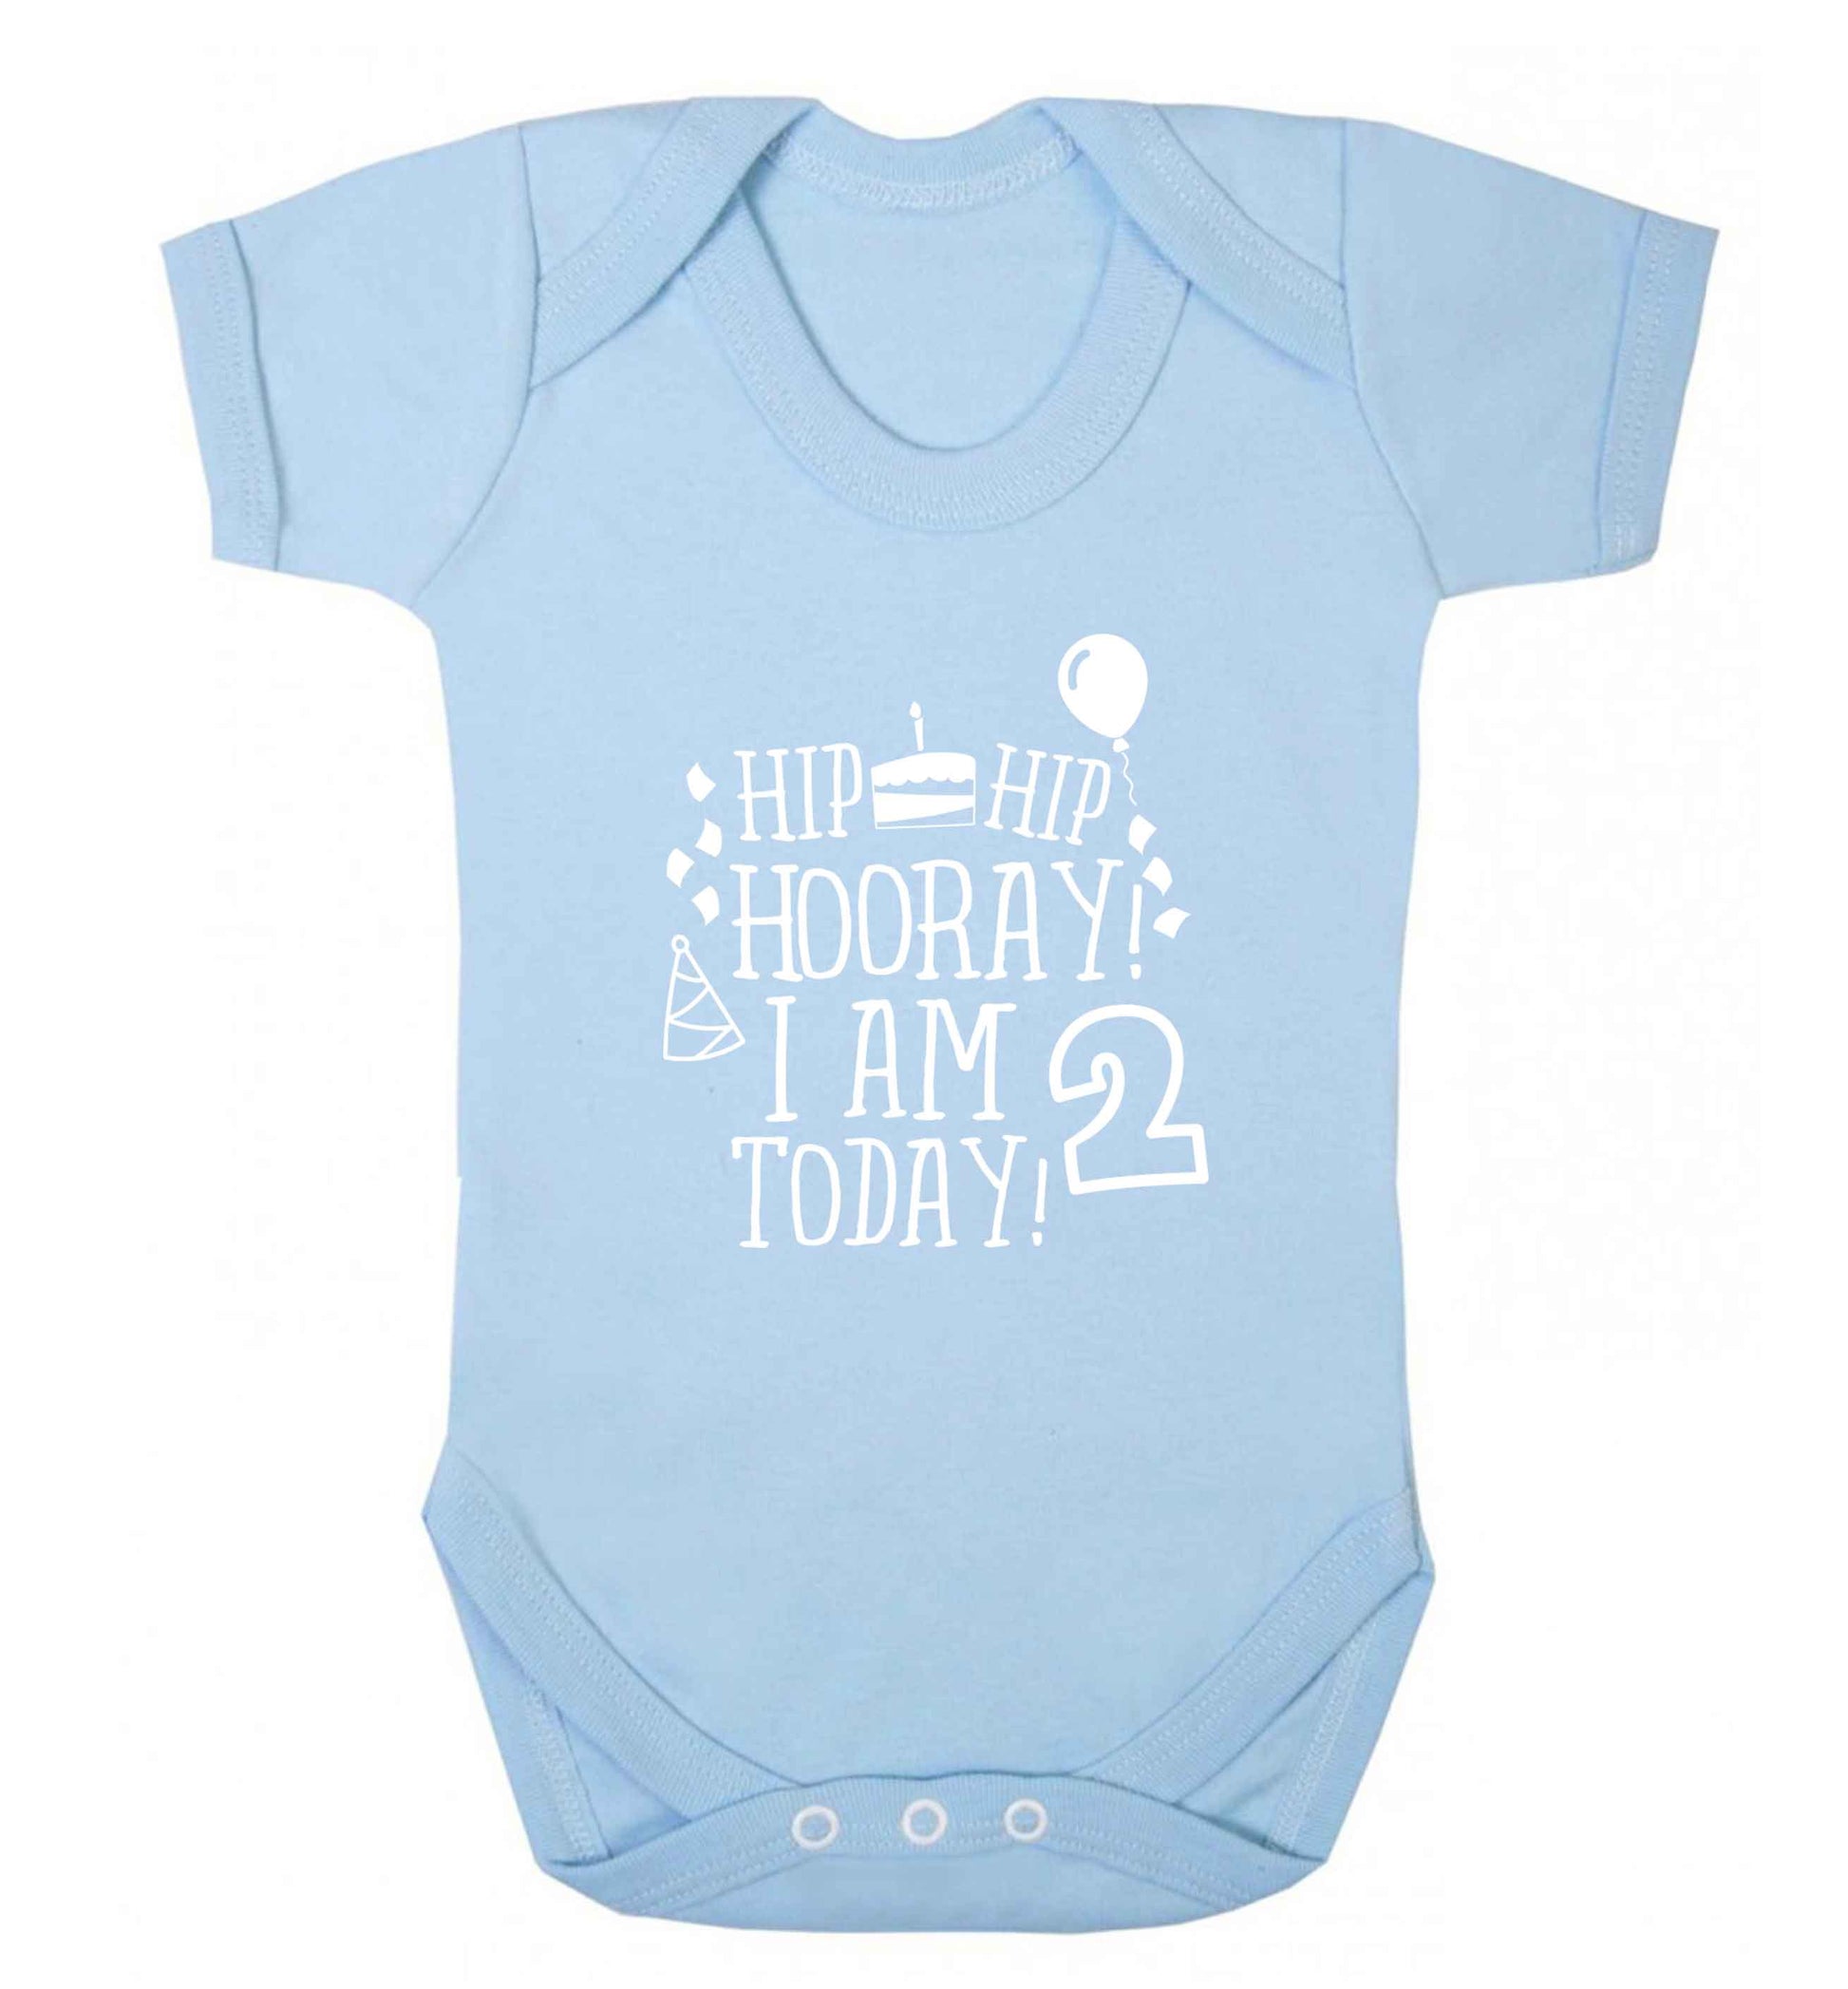 I'm 2 Today baby vest pale blue 18-24 months